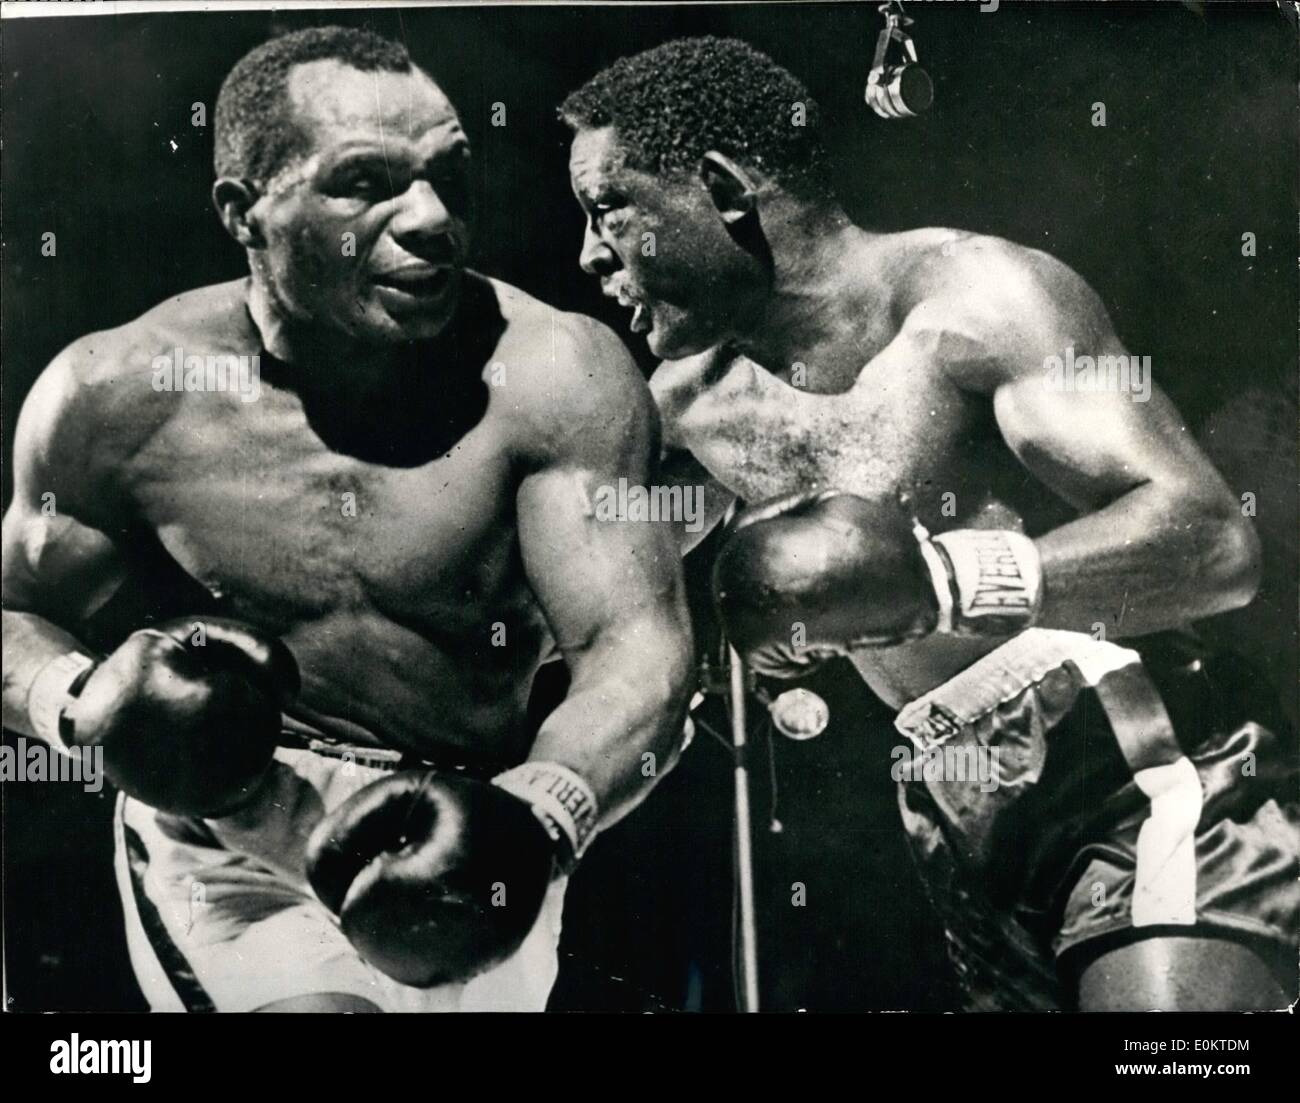 Mar. 03, 1951 - Ezzard Charles defeats Joe Walcott on Points..Fifteen round contest in Detroit: Photo Shows Ezzard Charles (right) and Jersey Joe Walcott seen during their fifteen round contest at the Olympia Stadium, Detroit, Mich...Charles won the contest on points - thus retaining his title. Stock Photo